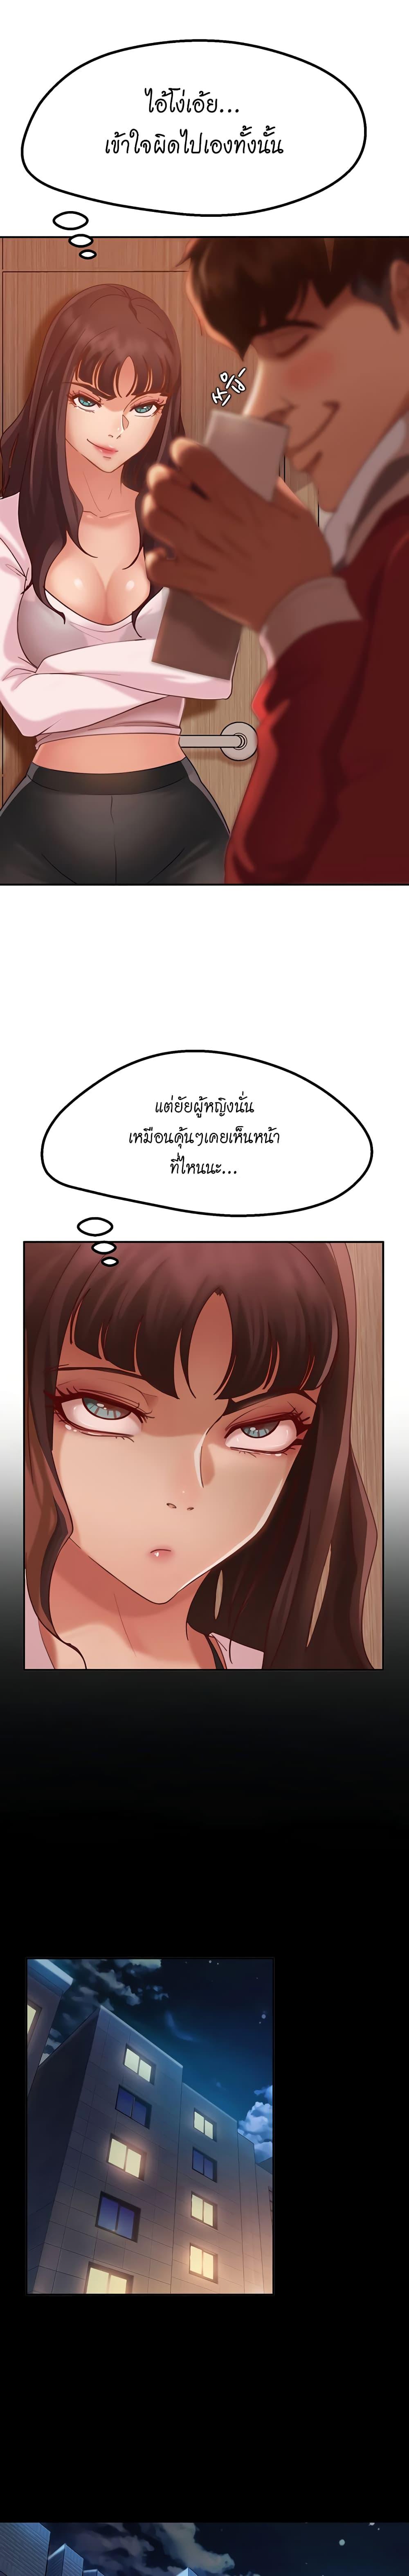 A Twisted Day 3 ภาพ 9